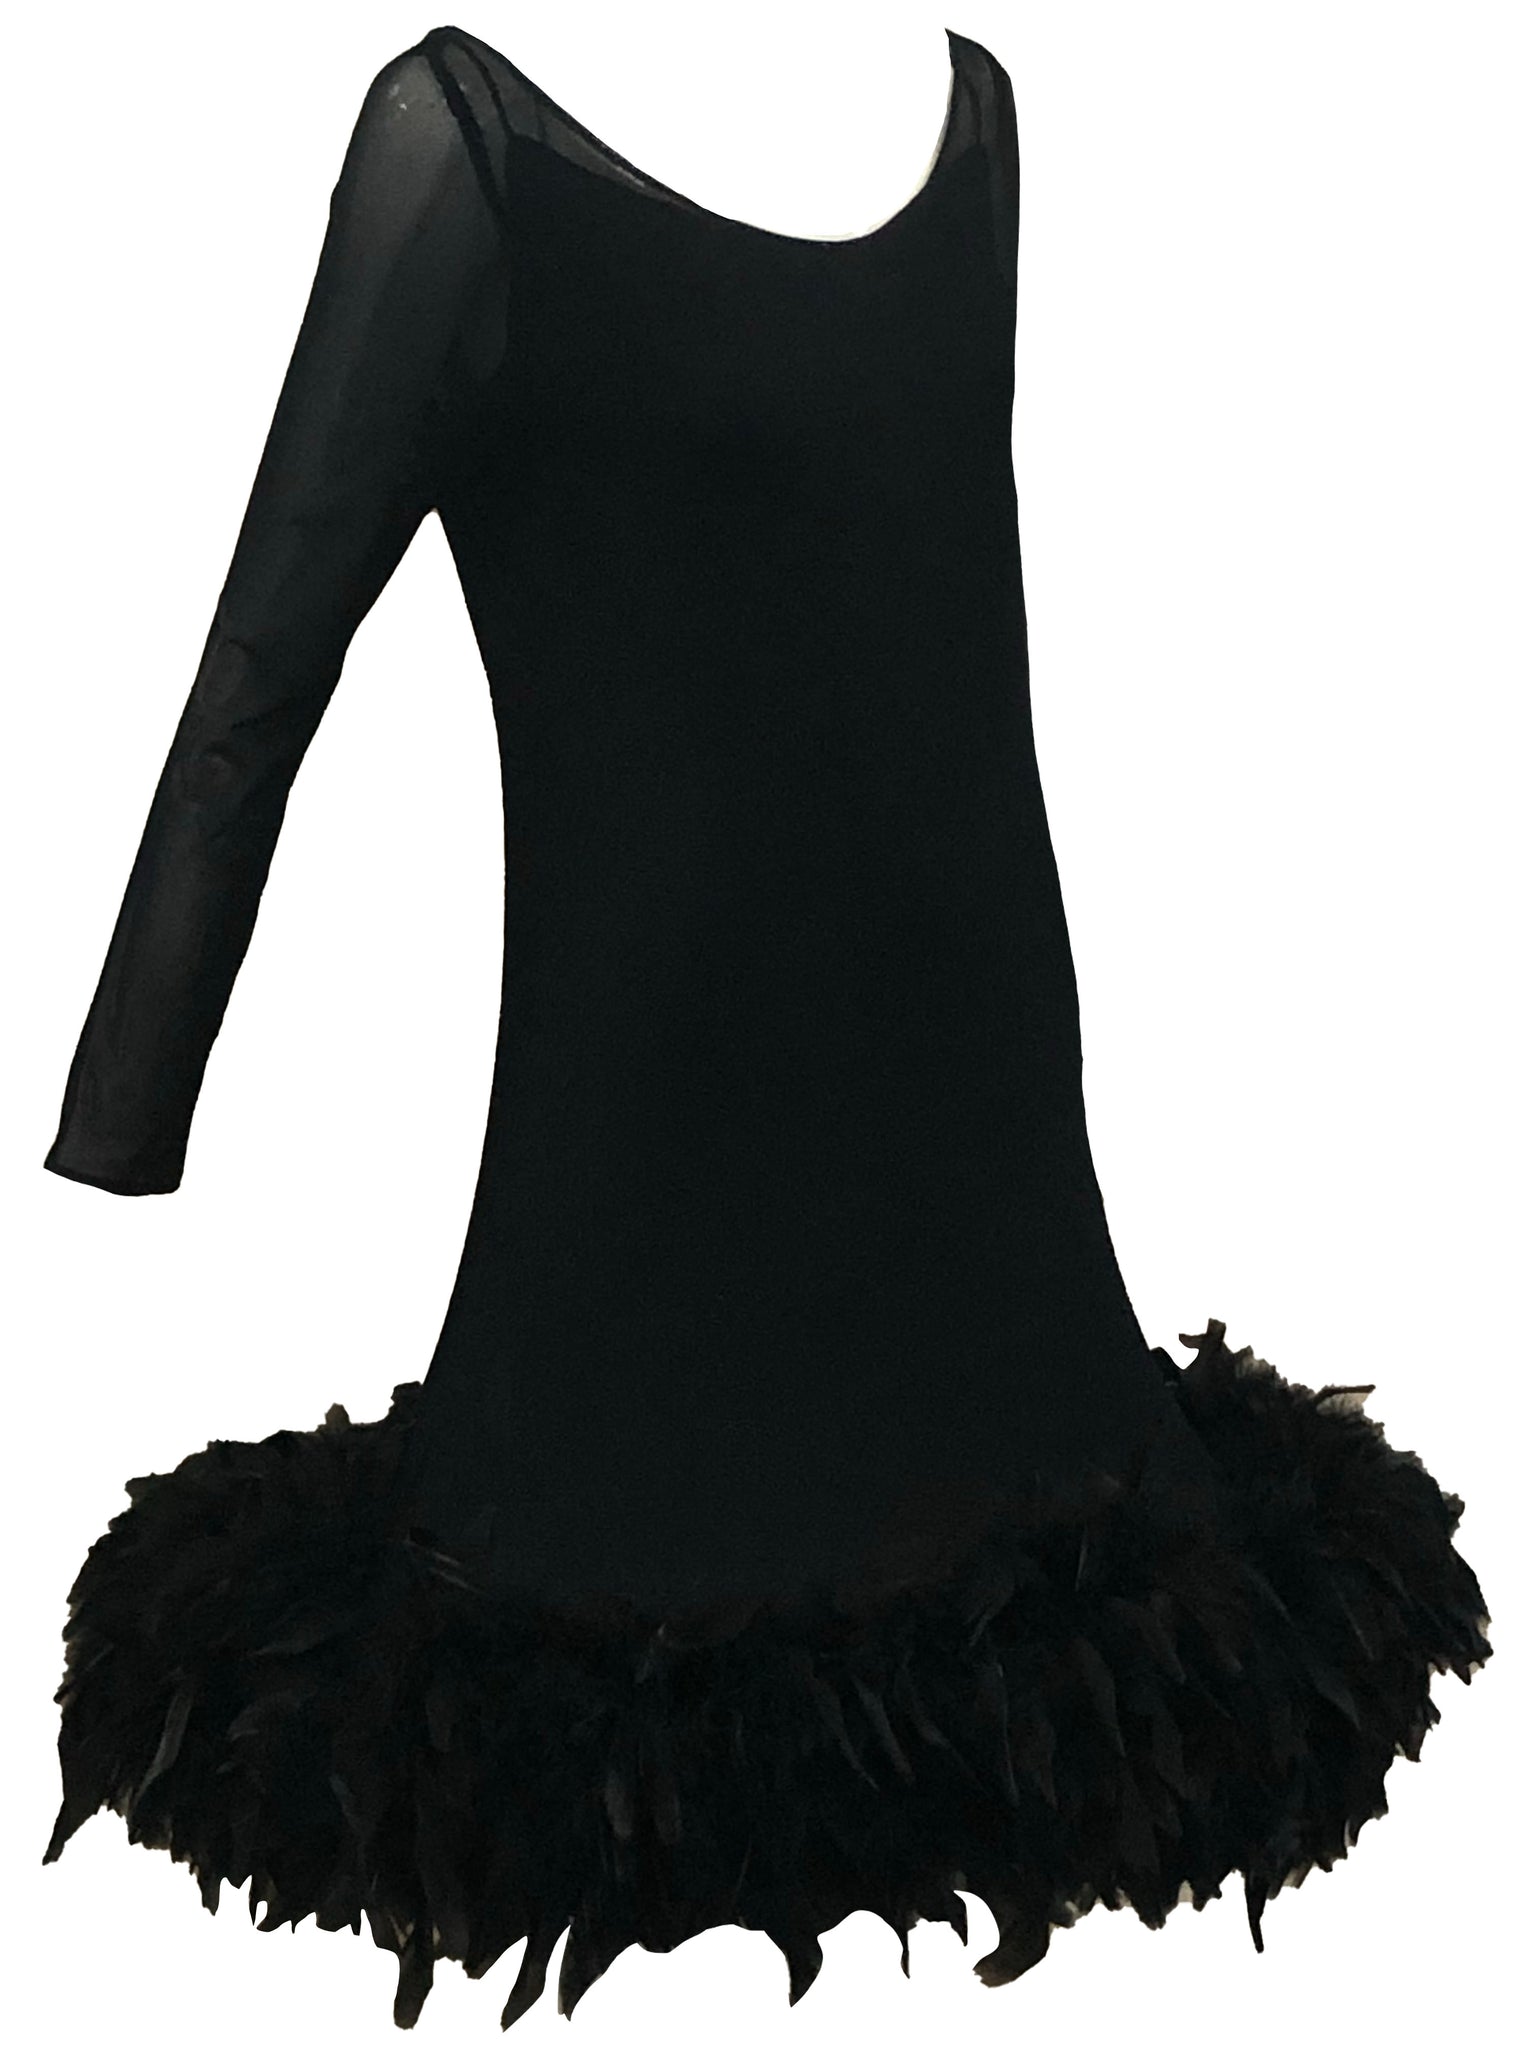 1994 Pierre Cardin Haute Couture Unlabelled Black Mesh Dress with Feathers SIDE 2 of 4